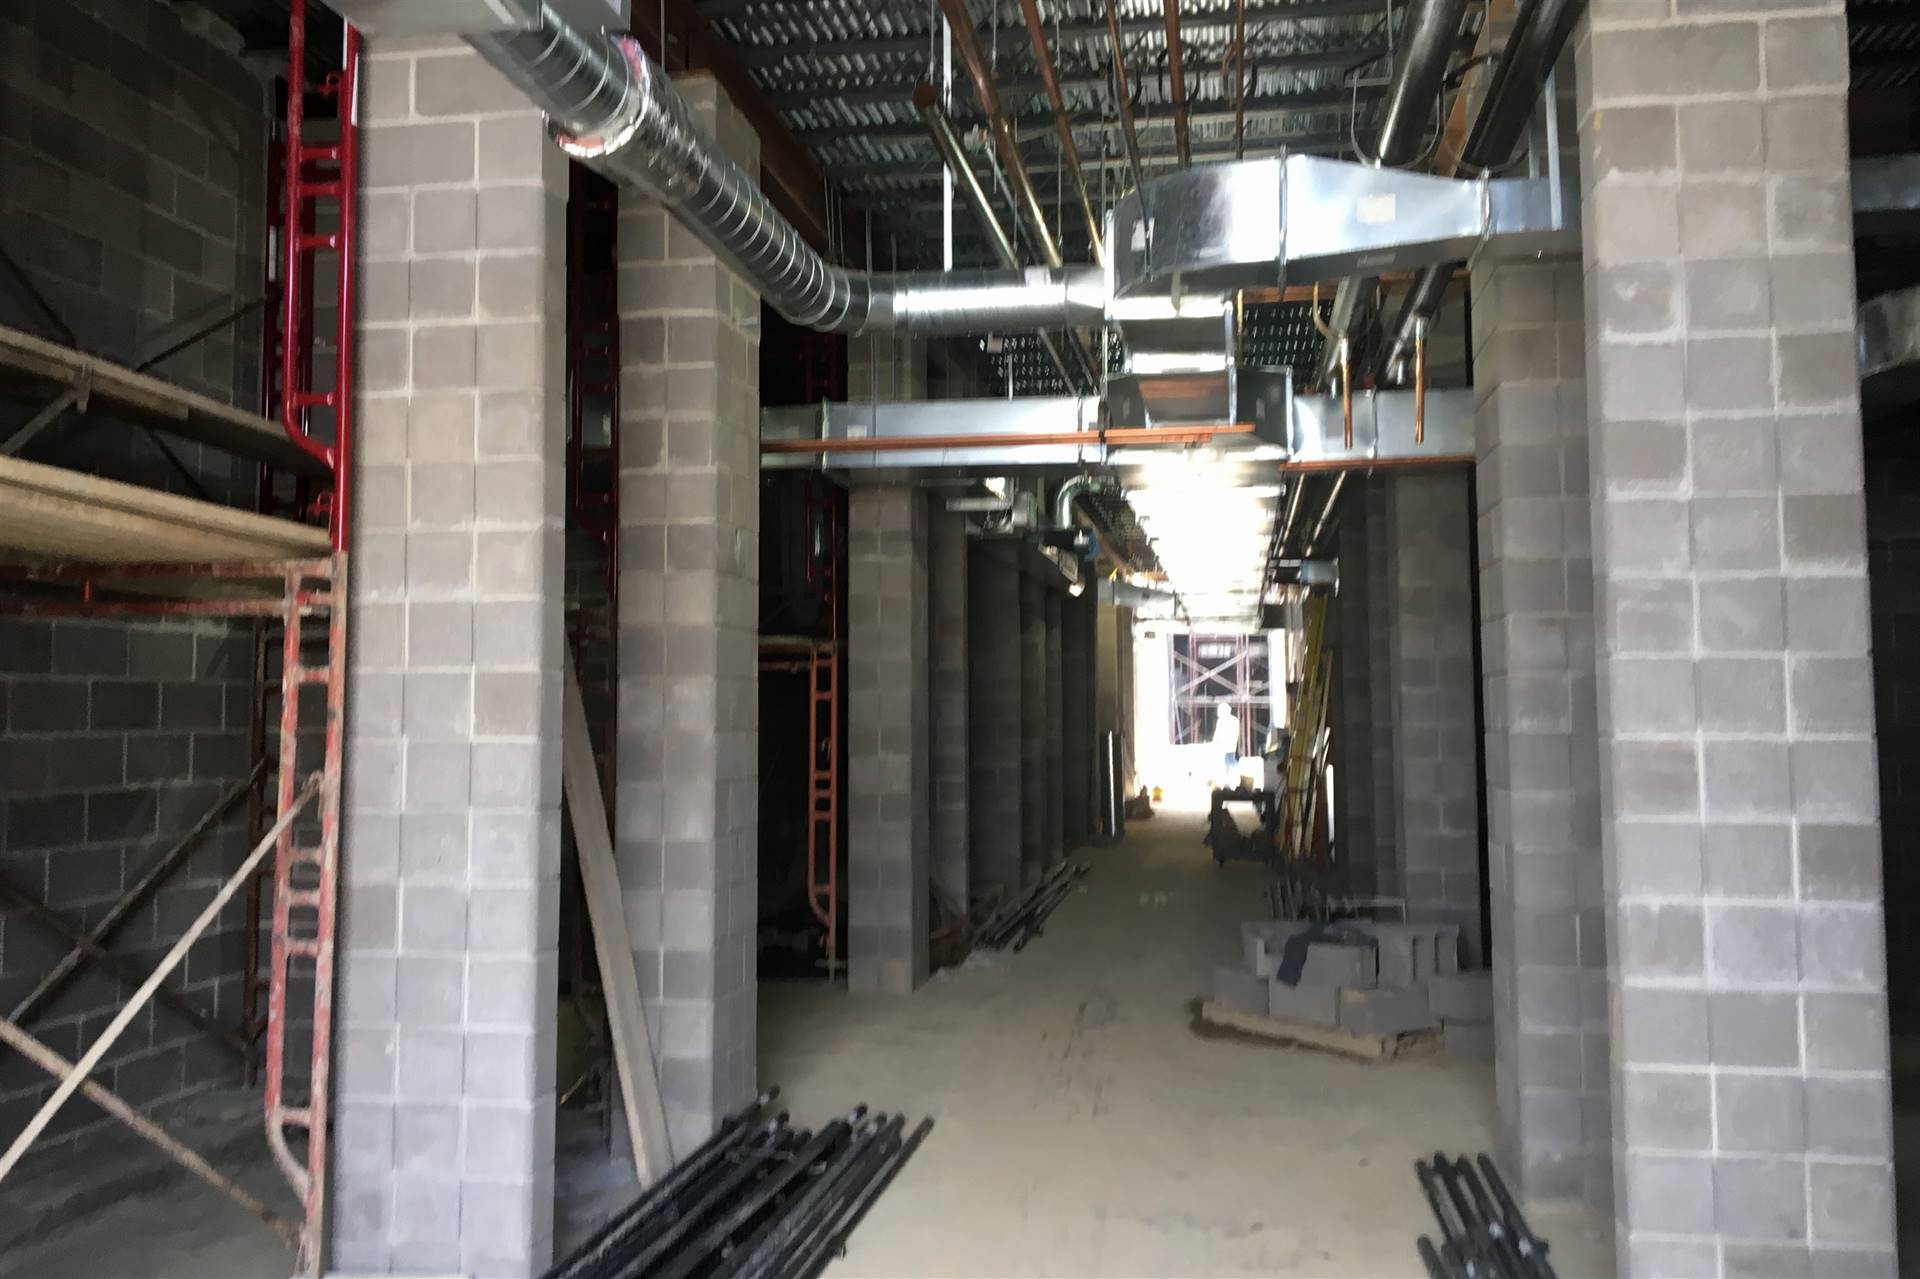 New school construction site with cinderblock hallway with exposed HVAC system